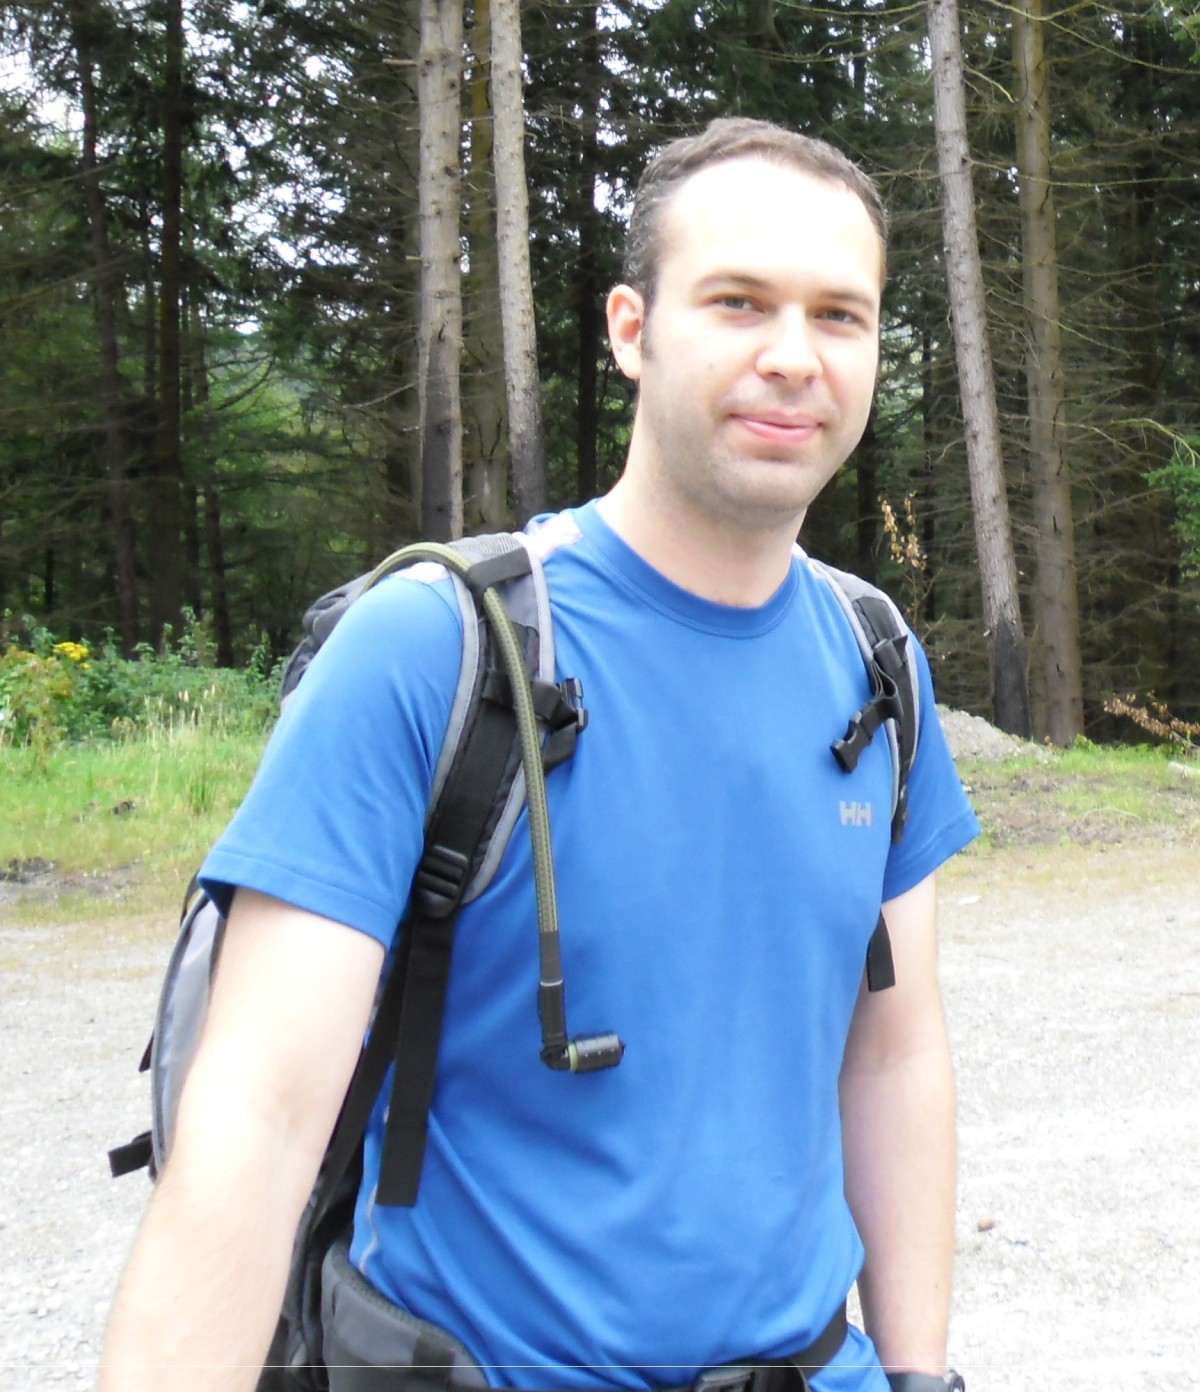 Fellow HikersBlog author Eamonn hiking in a base layer